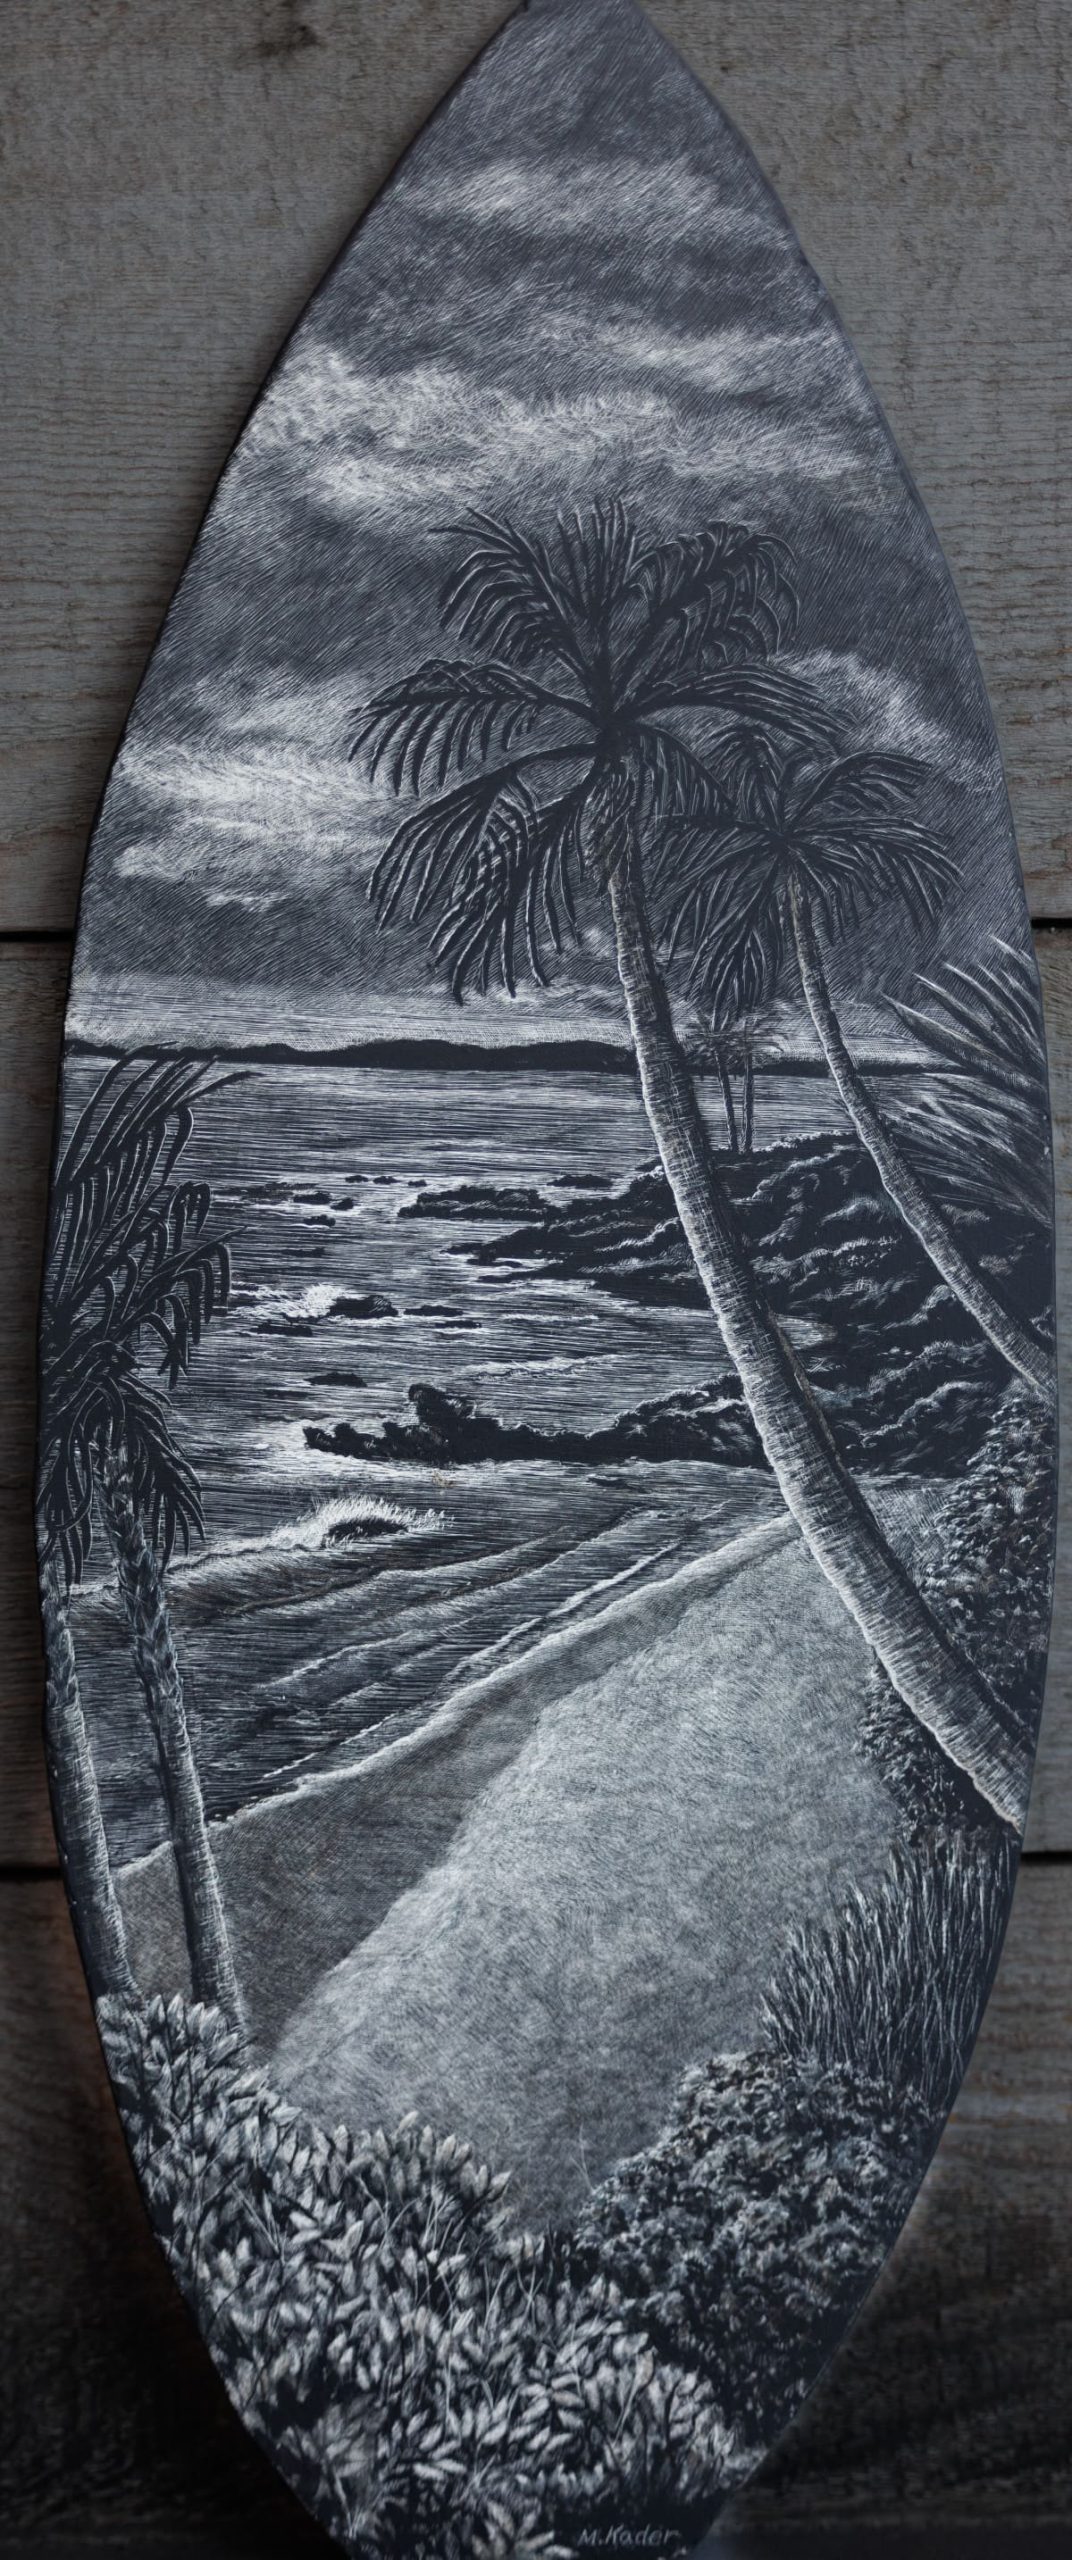 Only in Laguna 12”x5” Sold